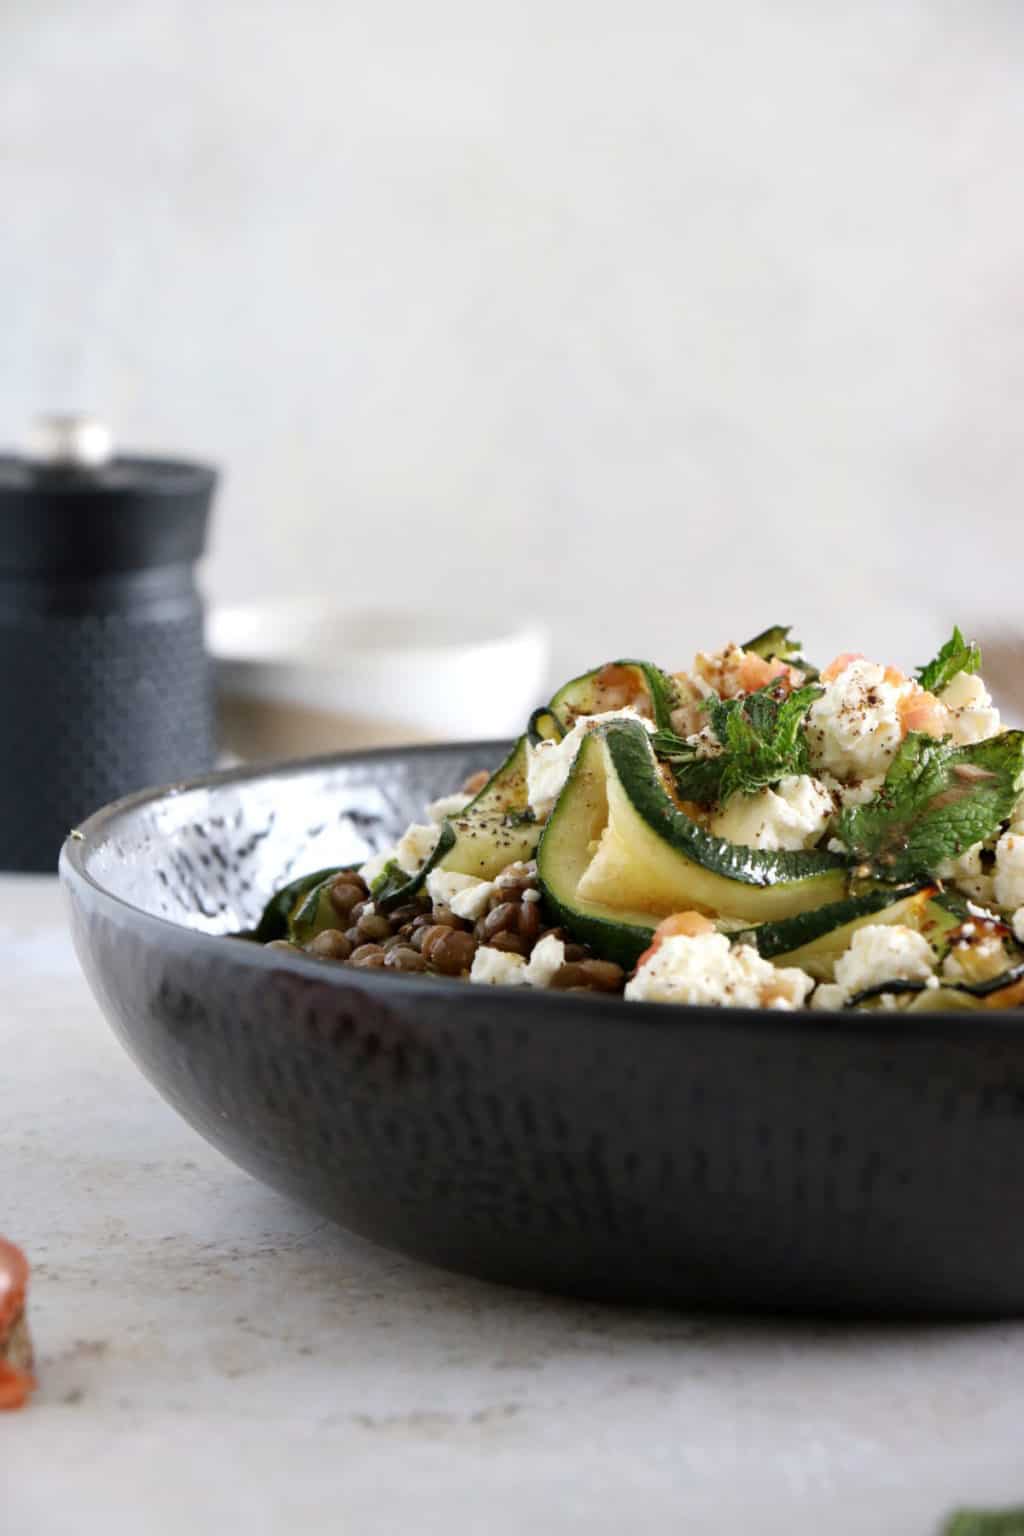 Lentil Salad with Zucchini, Feta and Mint - Del's cooking twist